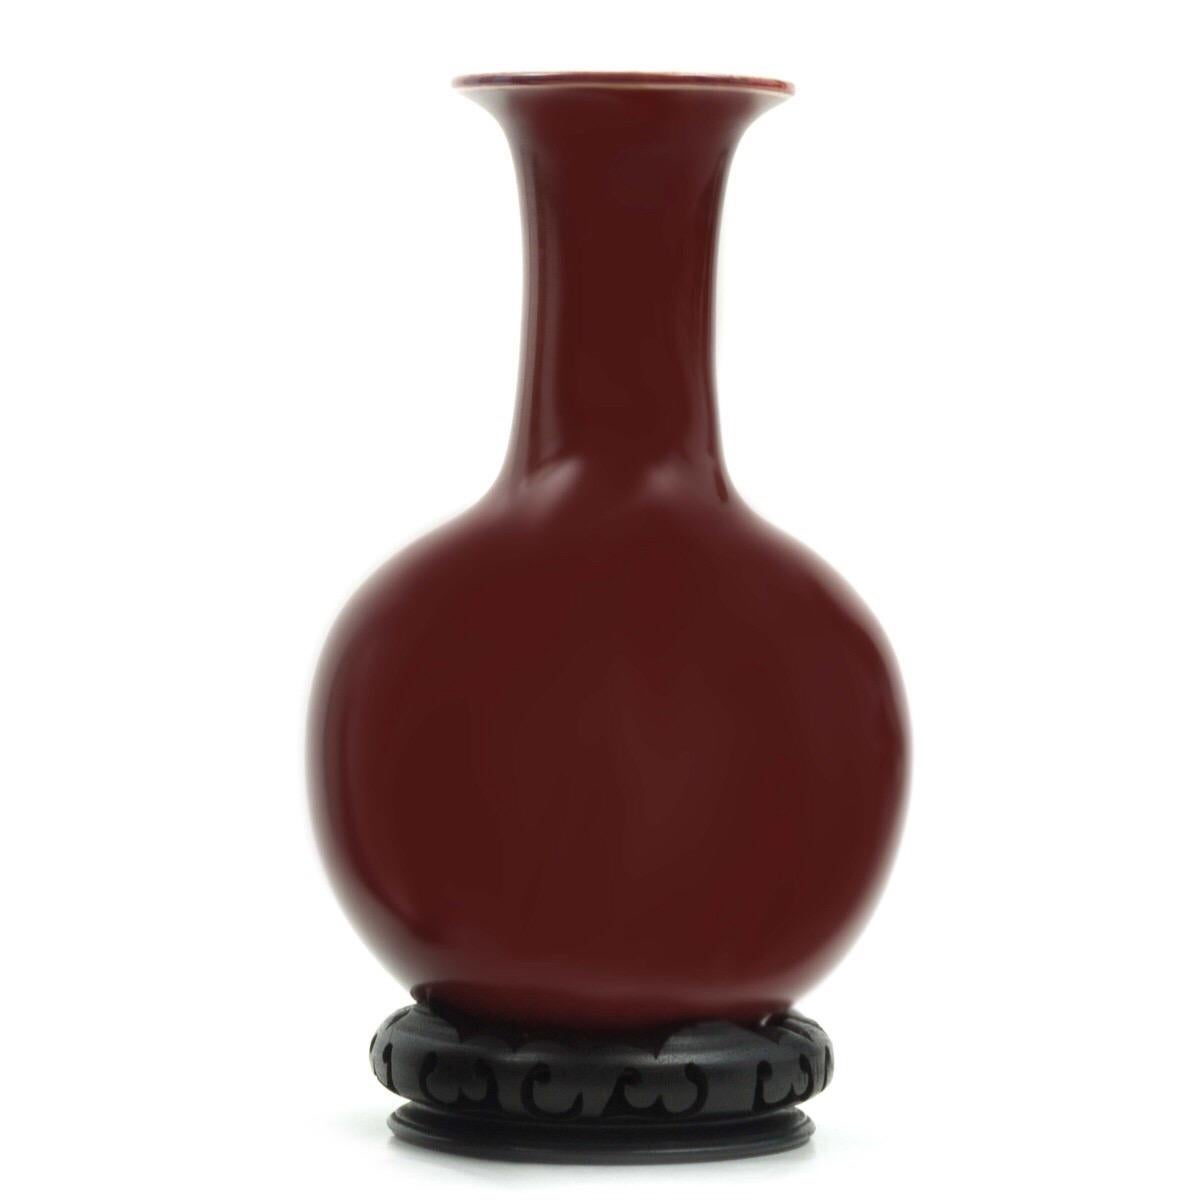 Pair of antique oxblood glazed porcelain vases with removable carved wood Stand. Chinese, dating to late 19th century or early 20th century. Signed. Provenance: From a New York collector who purchased the vases as vintage in 1970; original sales tag